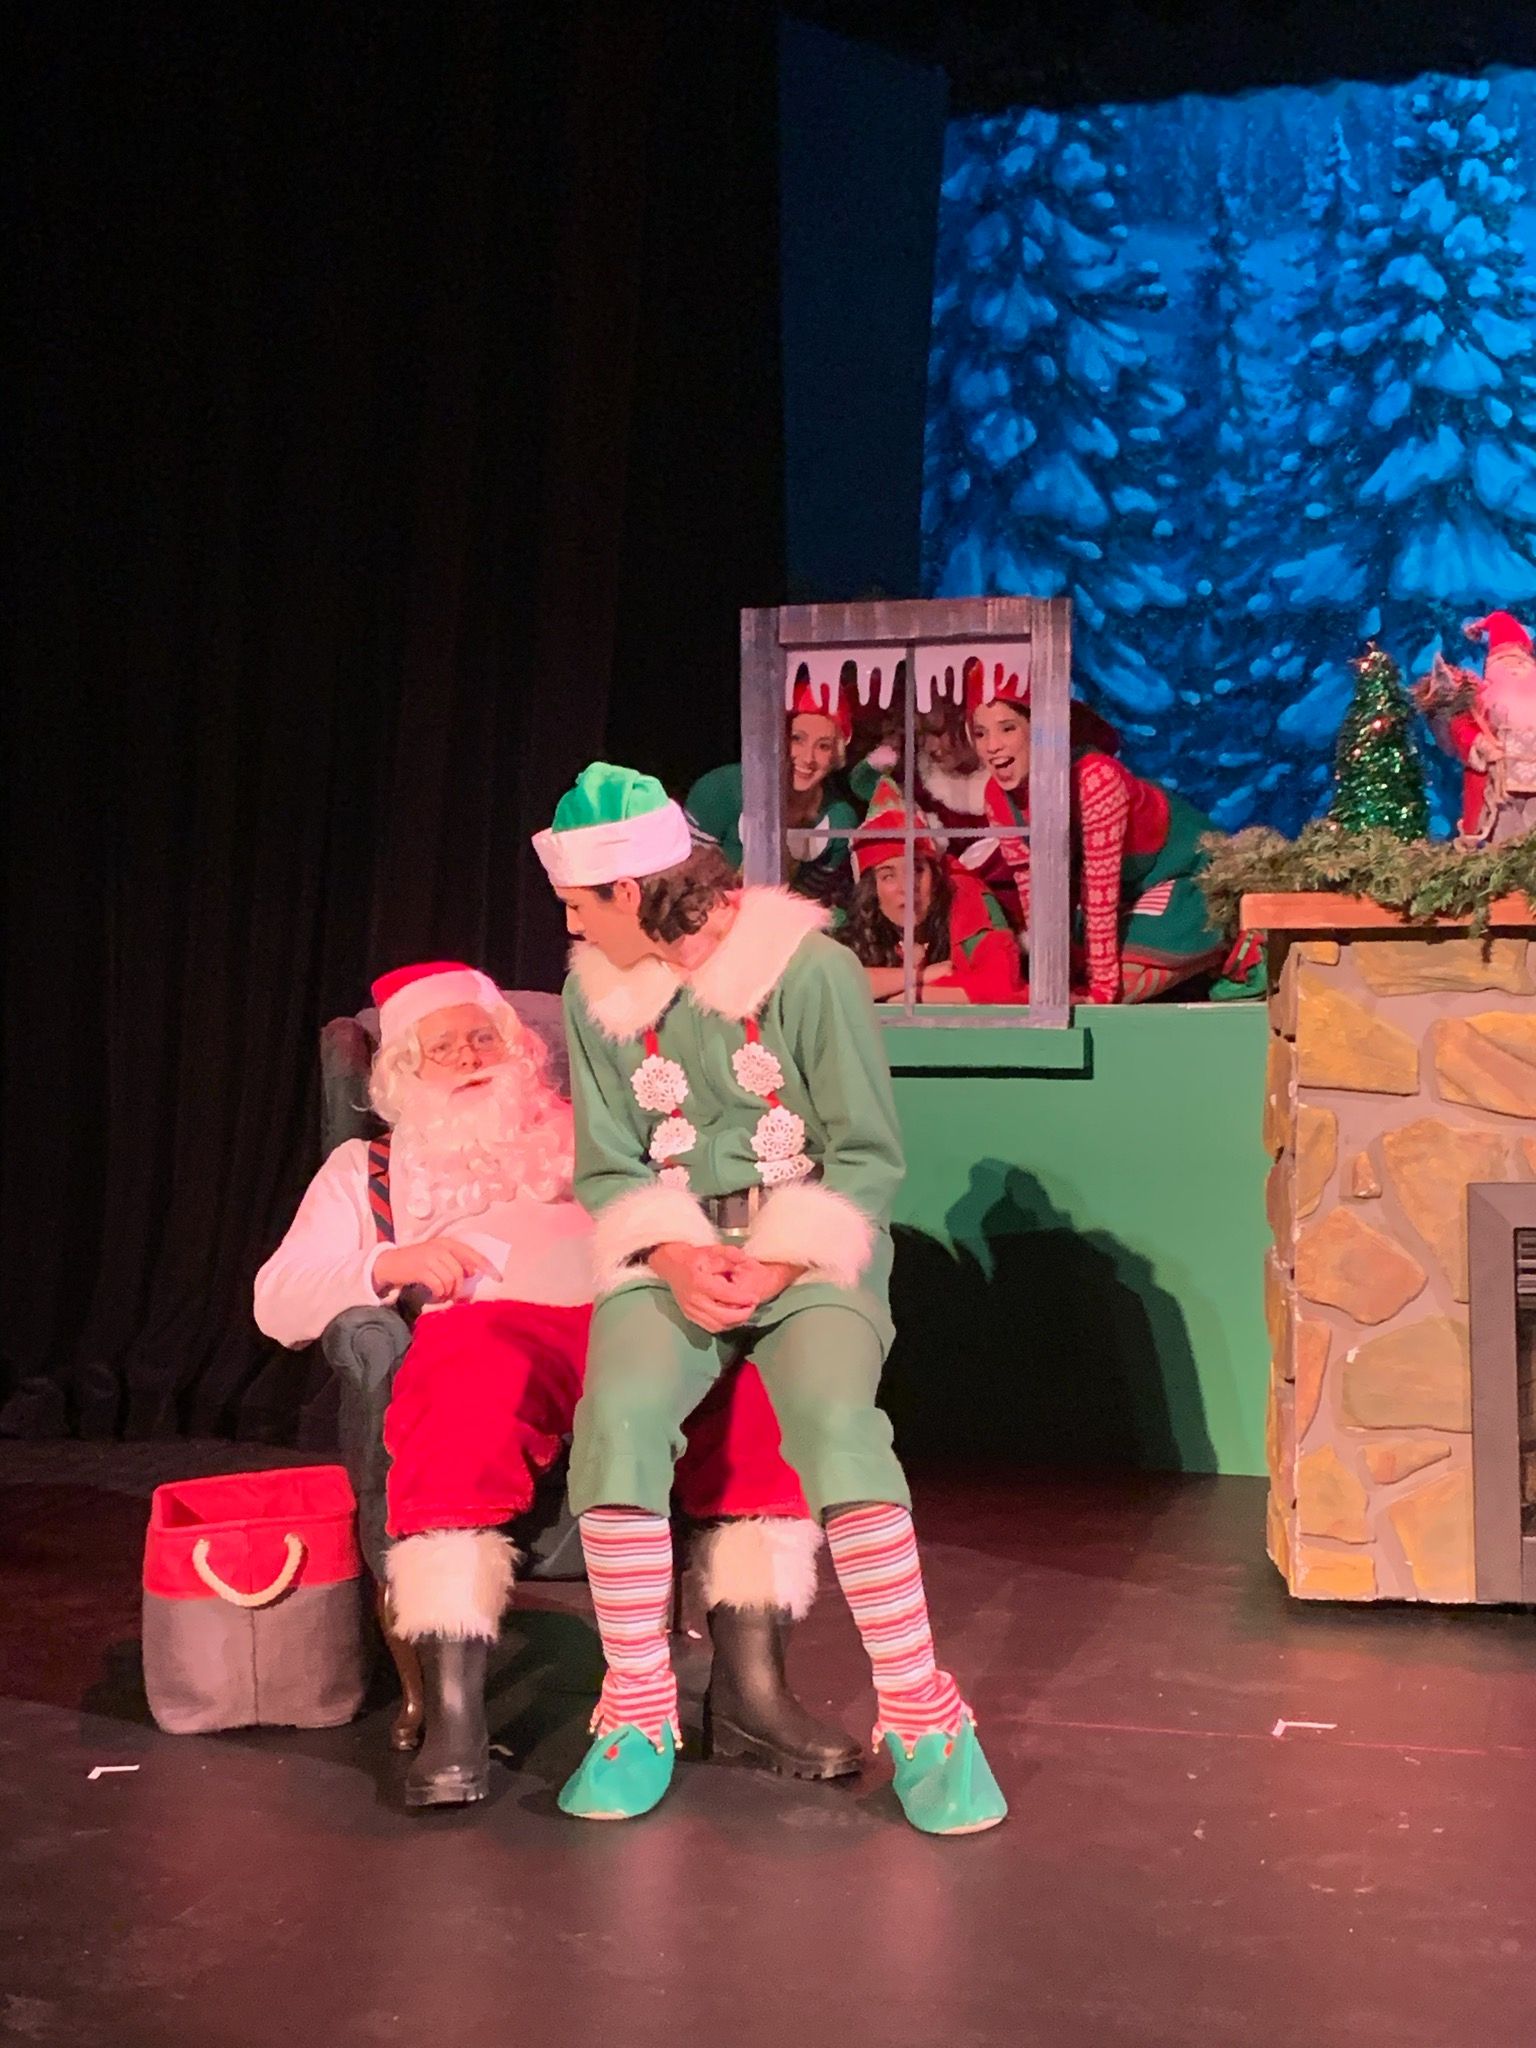 Catch Buddy the Elf on the stage this weekend